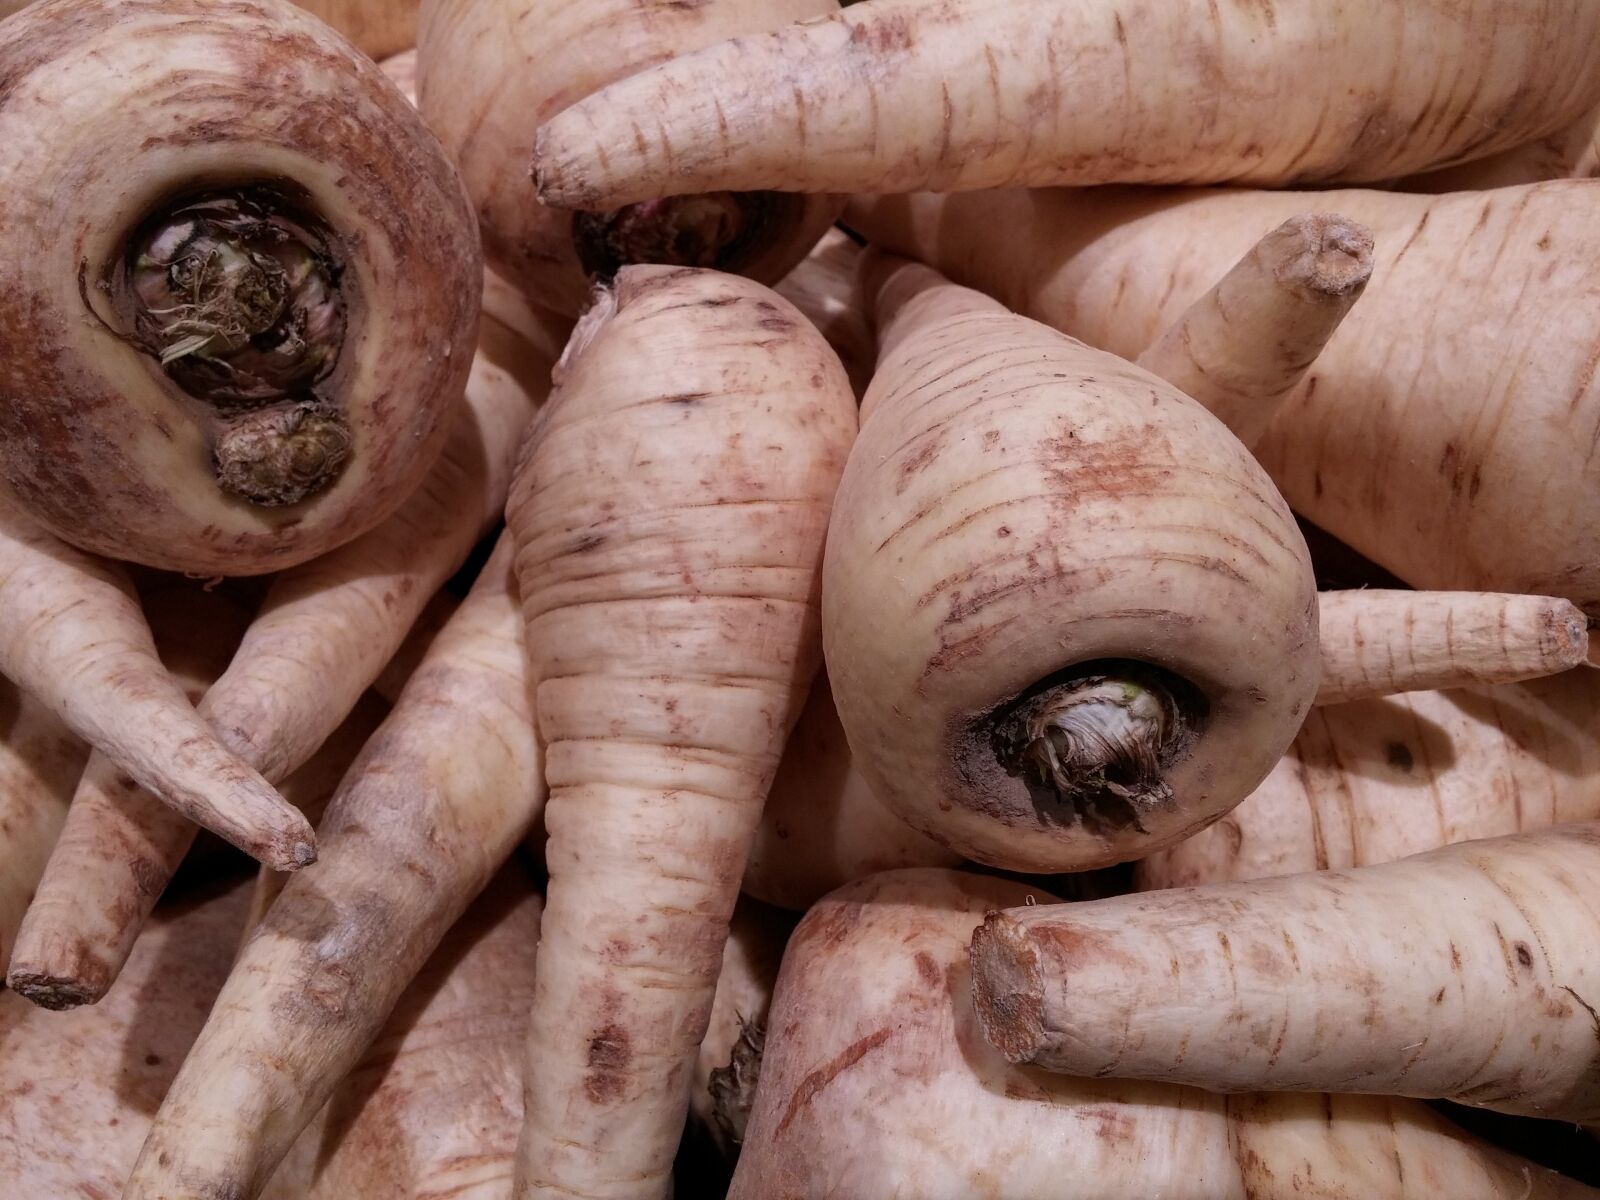 LG D855 sample photo. Parsnips, root, vegetables photography